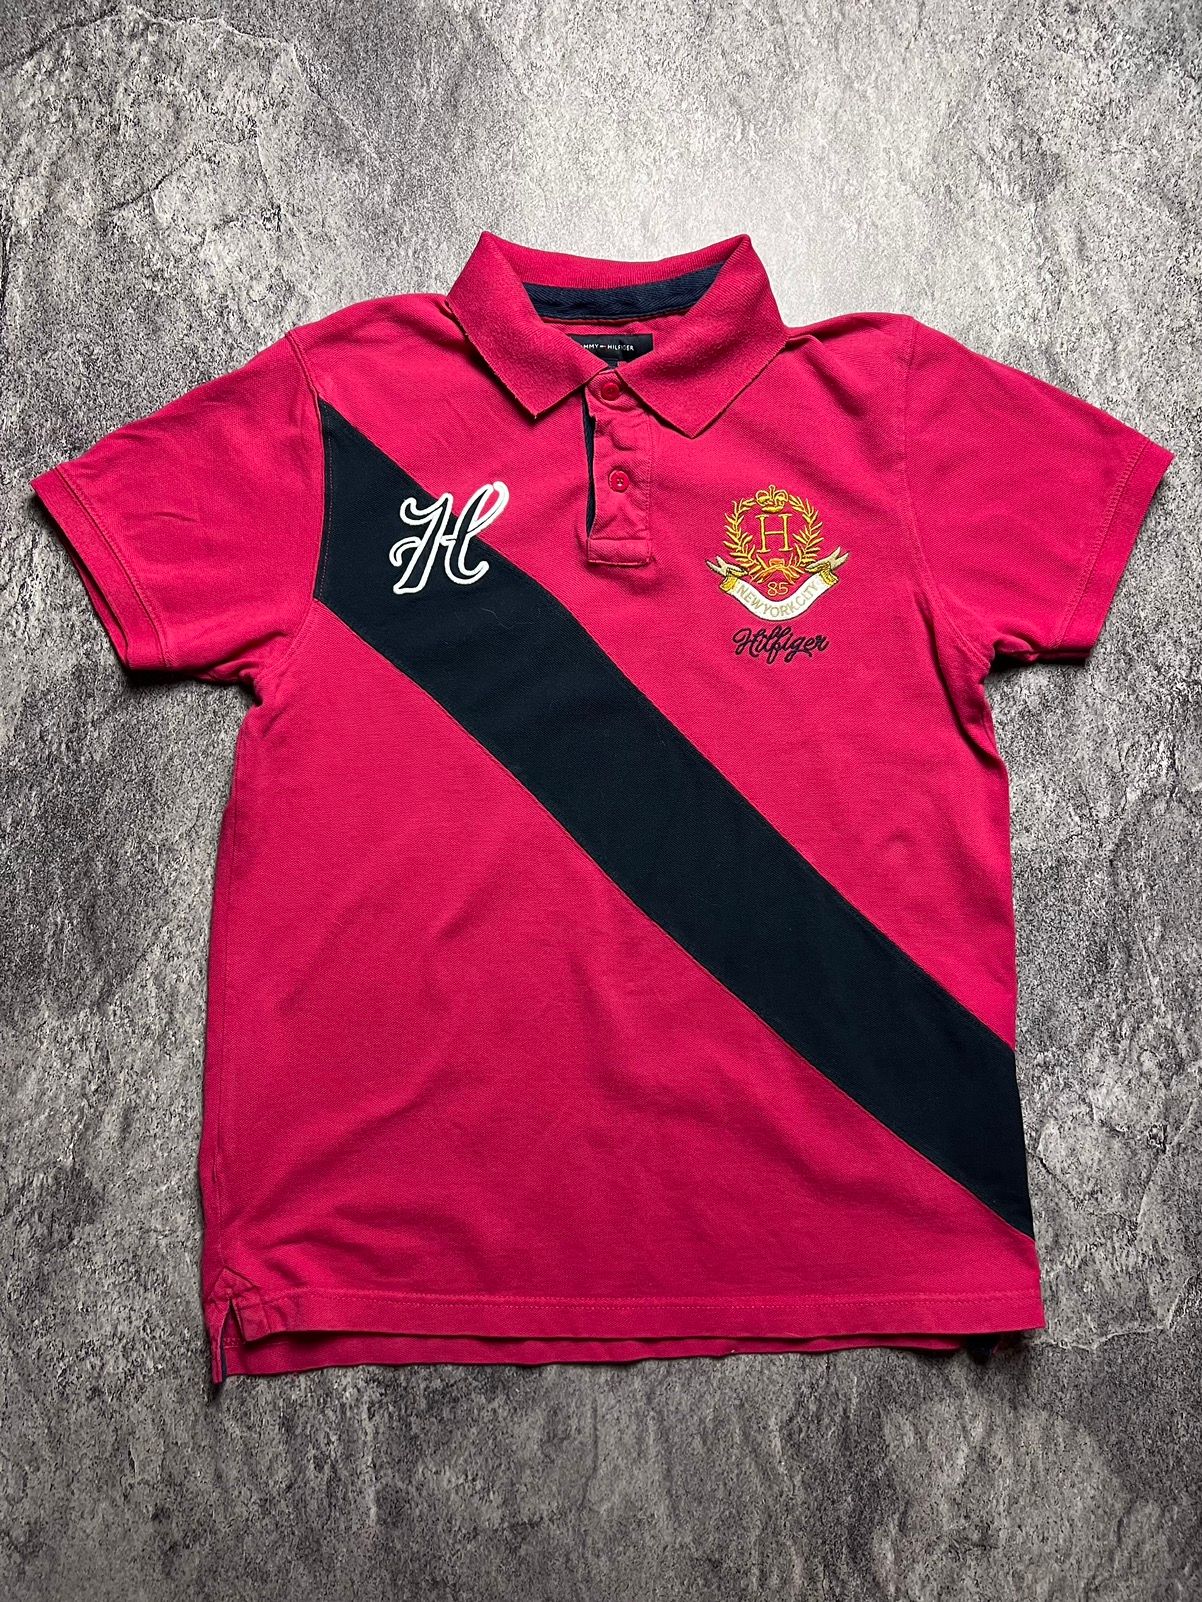 Pre-owned Tommy Hilfiger X Vintage Y2k Tommy Hilfiger New York Blokecore Japan Style Polo Tee In Pink